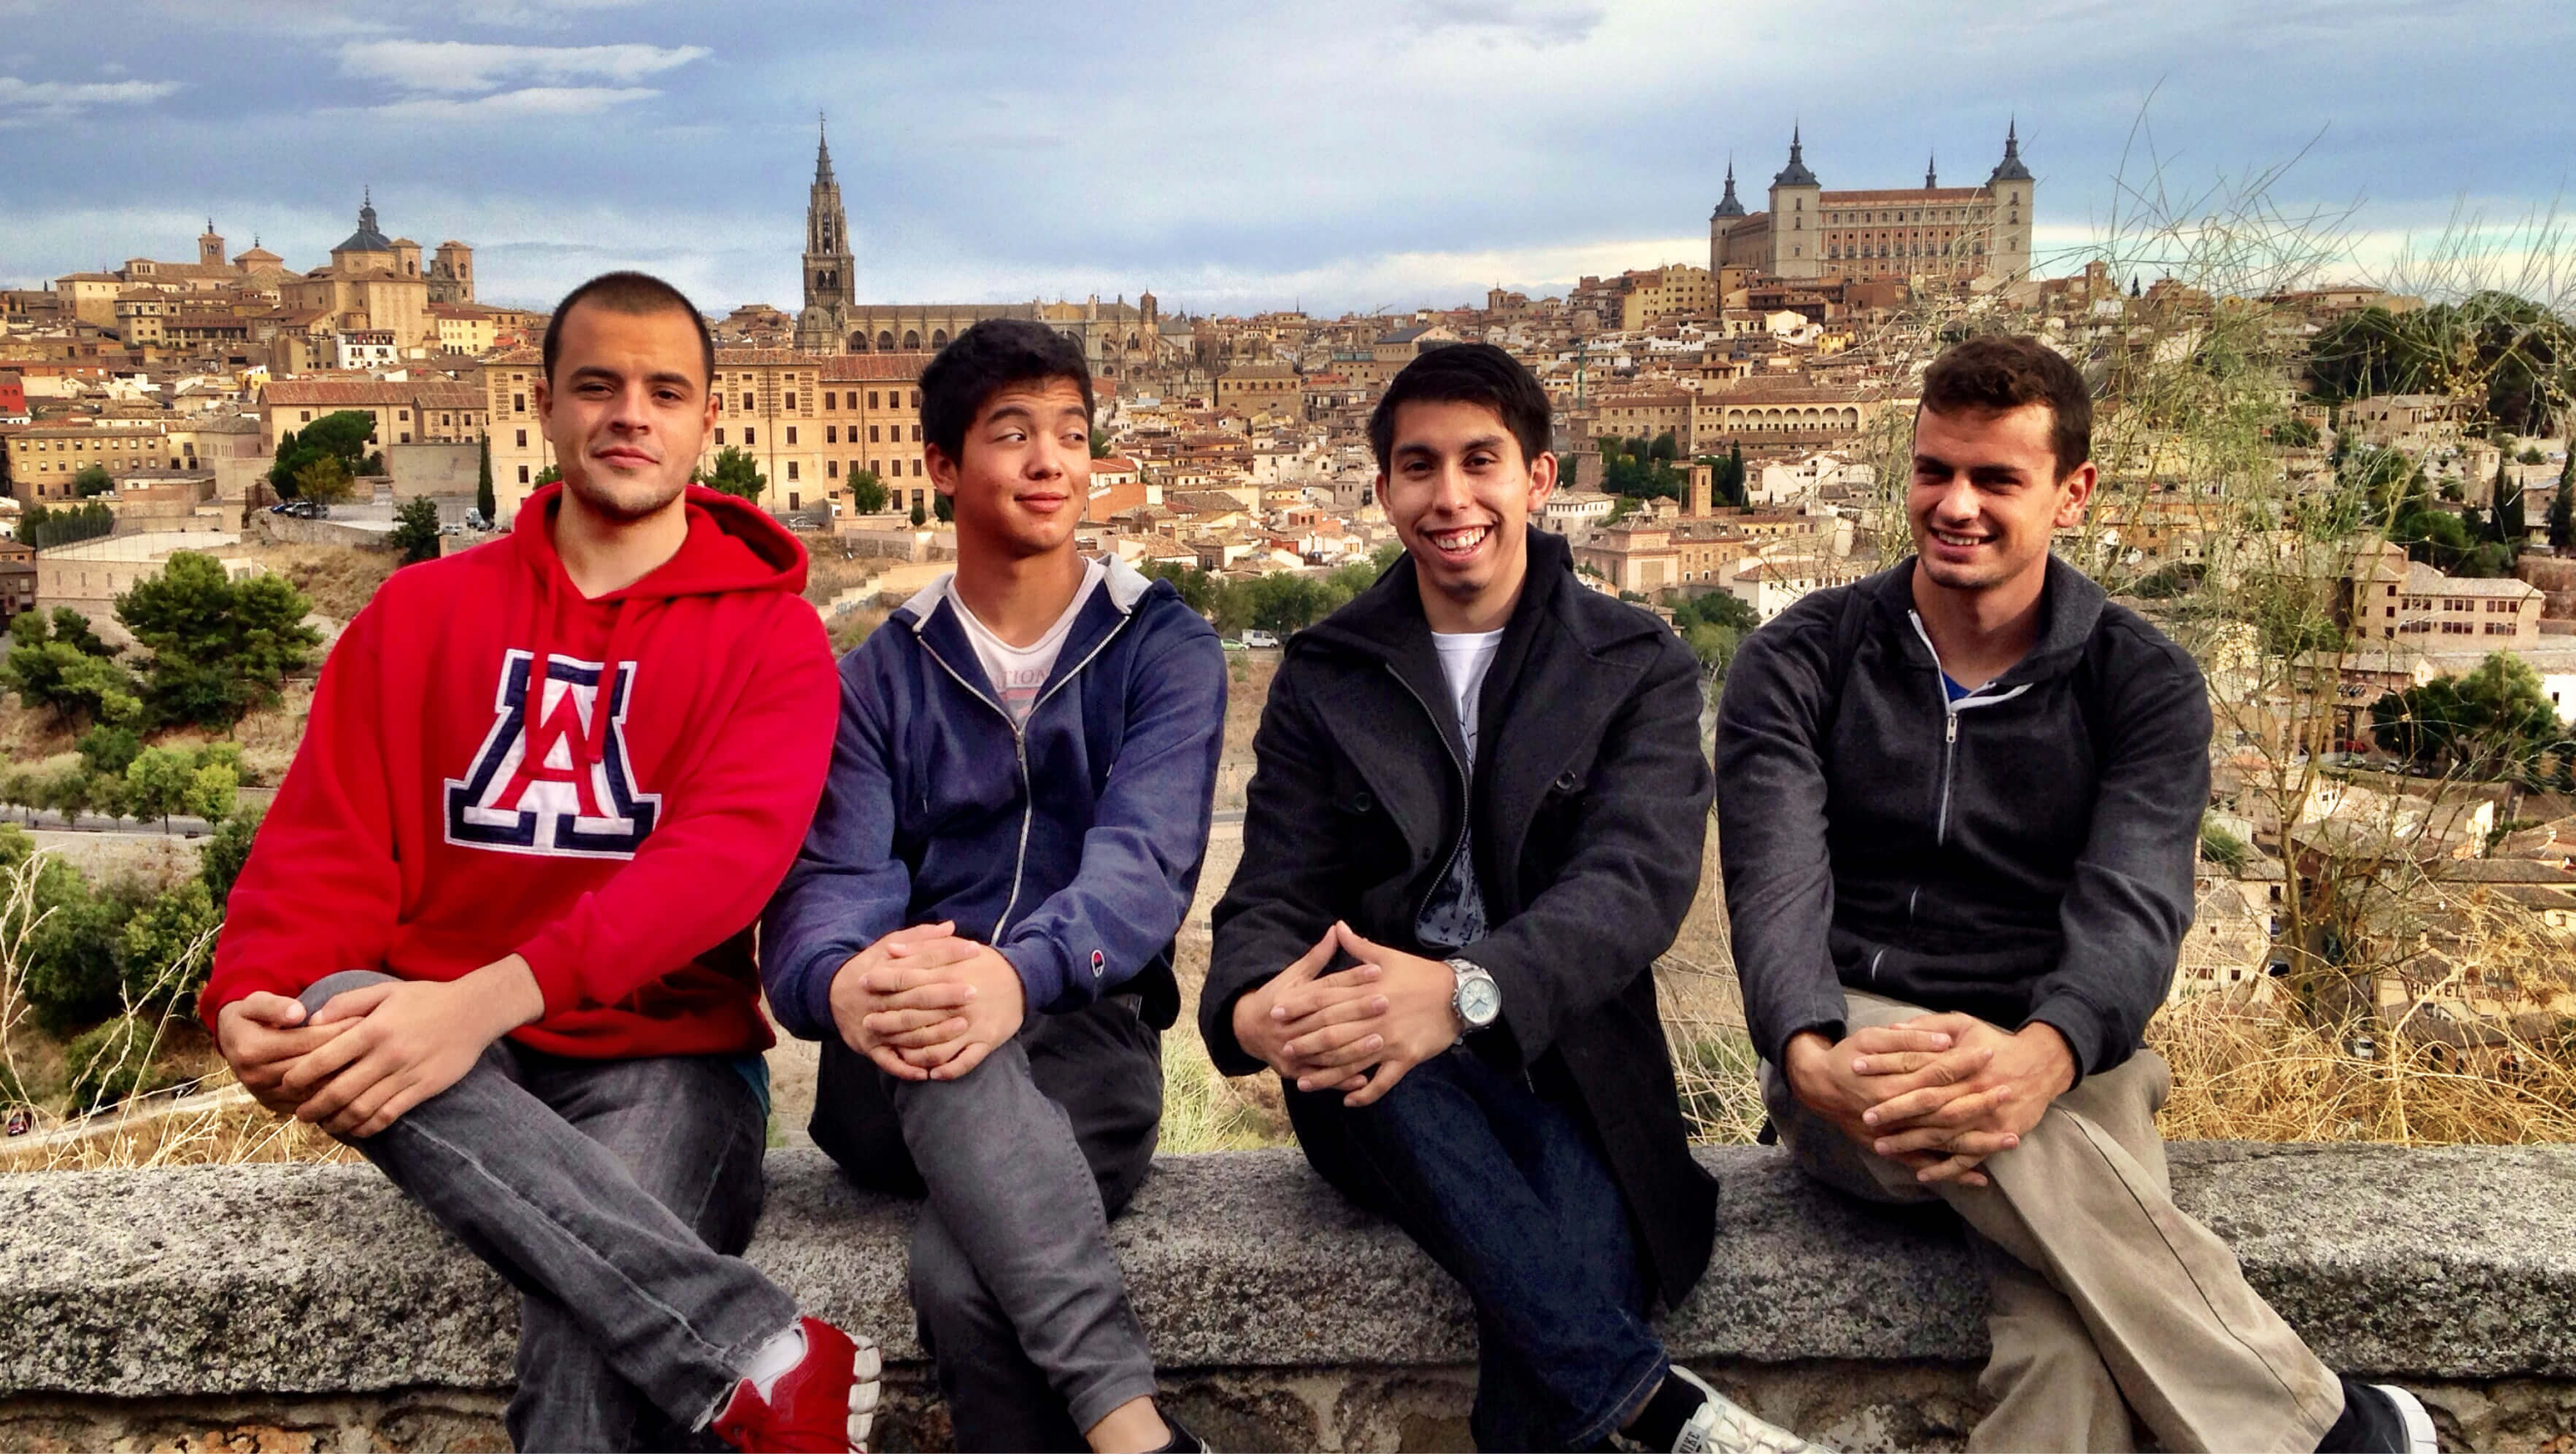 Students enjoying the scenery on their Abroad trip